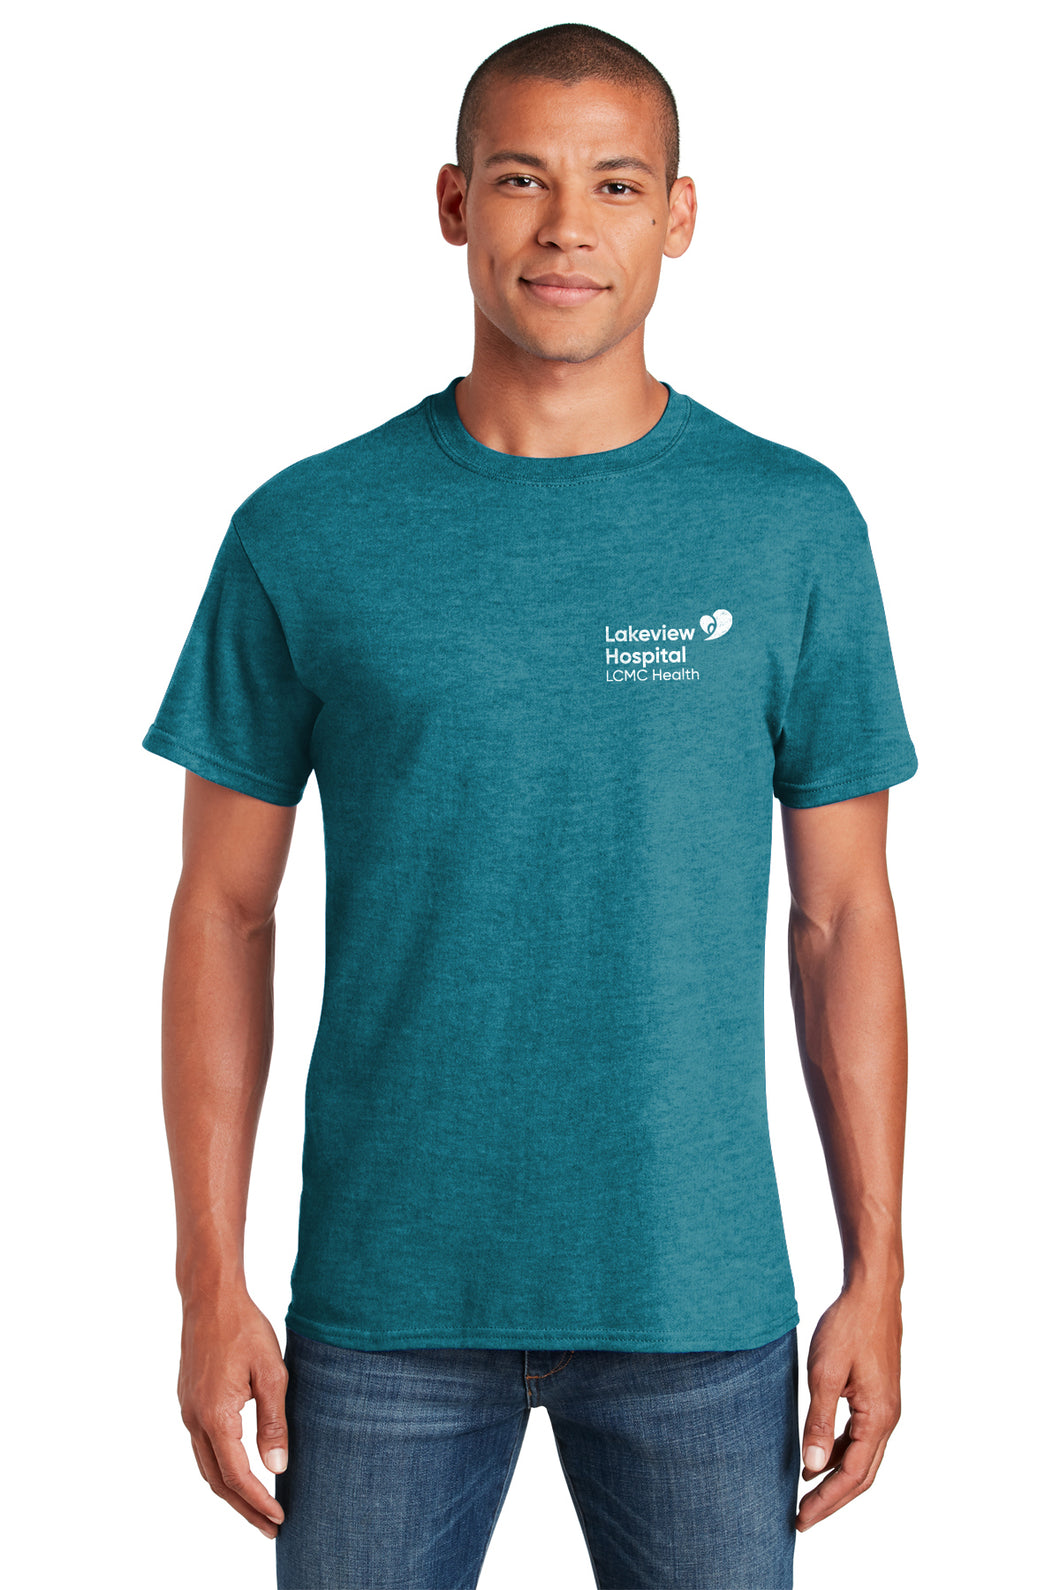 For a Limited Time  -    Personal Item Lakeview LCMC Health Heart Walk and NAMI Walk Tee Shirts